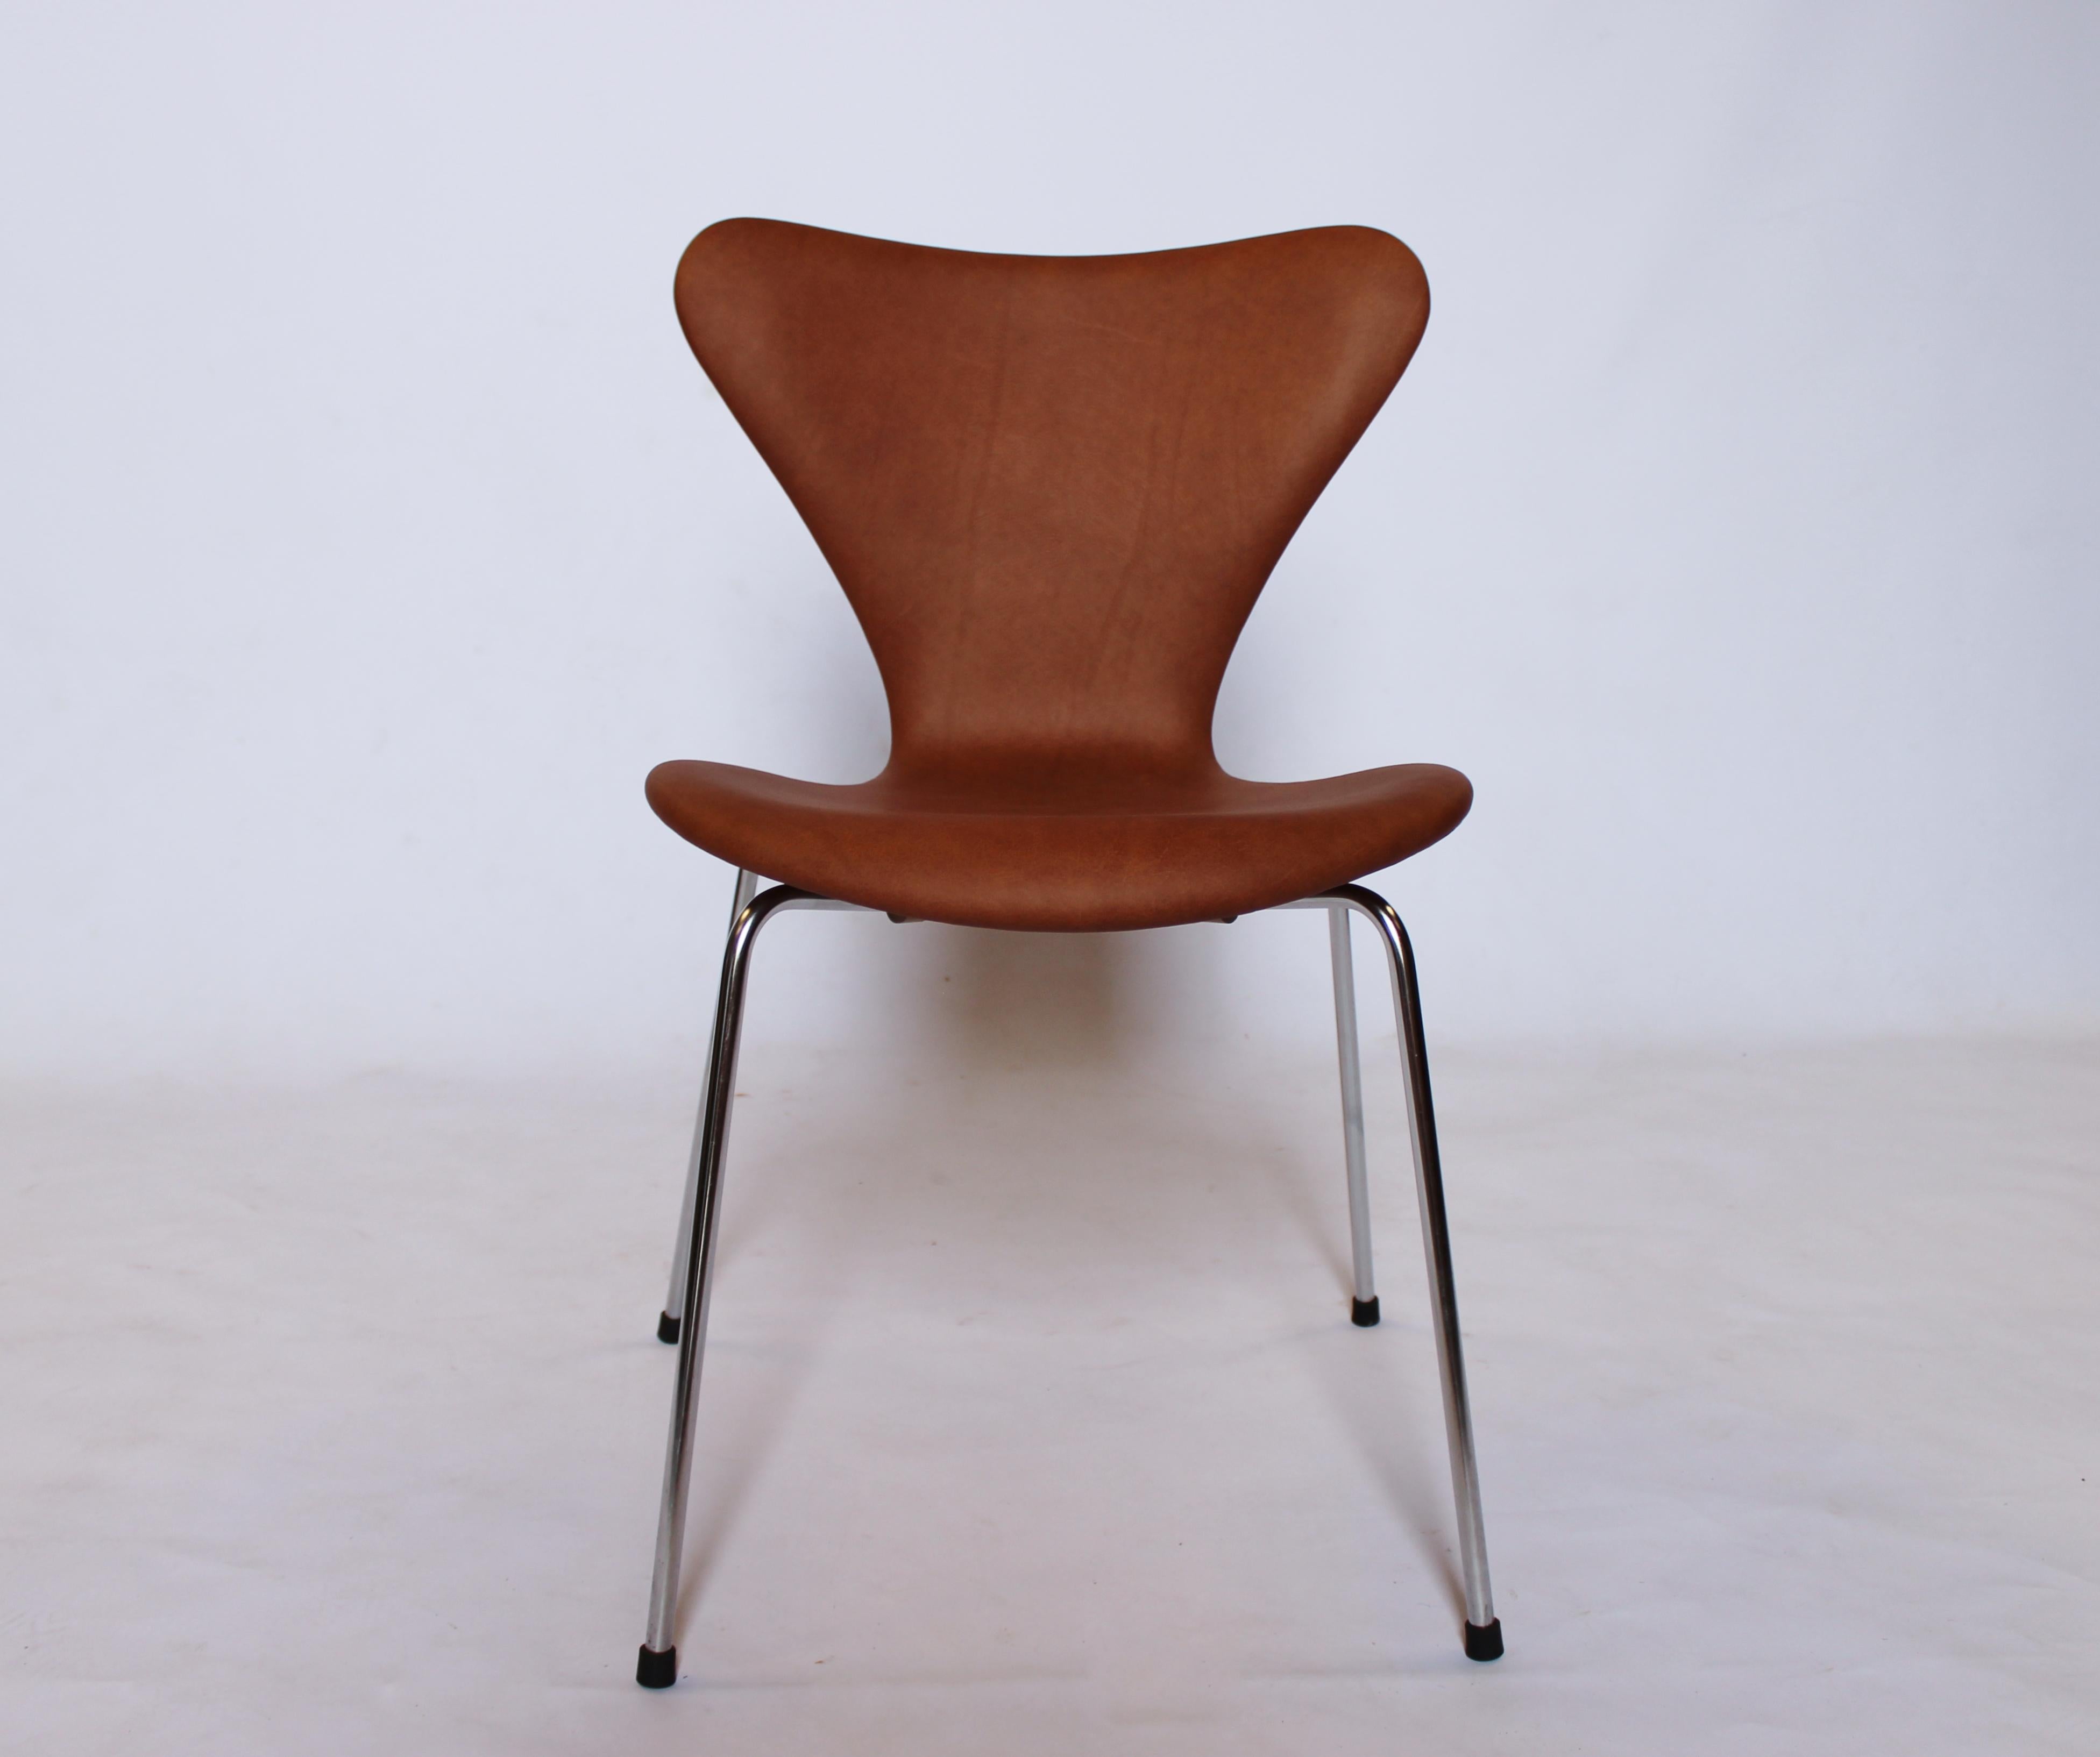 A set of six Seven chairs, model 3107, designed by Arne Jacobsen and manufactured by Fritz Hansen in 1967. The chairs are newly upholstered in cognac patinated leather and are in great vintage condition.